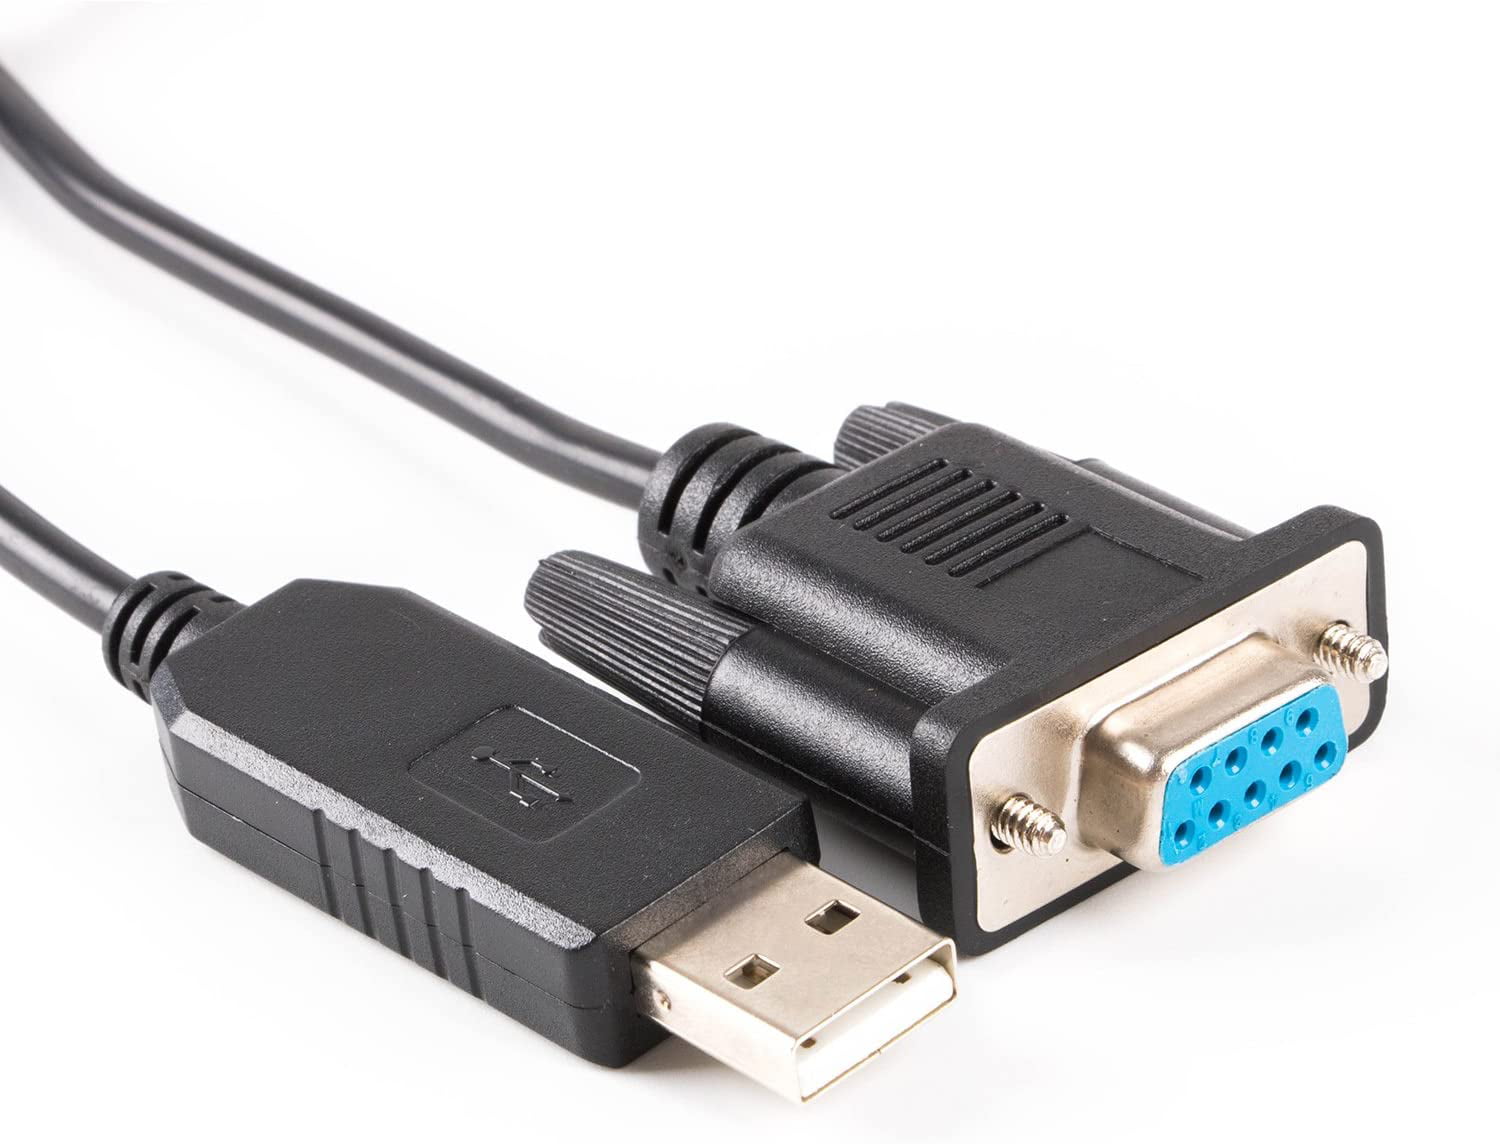 Squeak emne forberede PL2303TA USB RS232 to DB9 Cross Wired Rollover Null Modem Cable (Null Modem  pinout: 2-TXD, 3-RXD 5-GND, 7-CTS. 8-RT) - Walmart.com